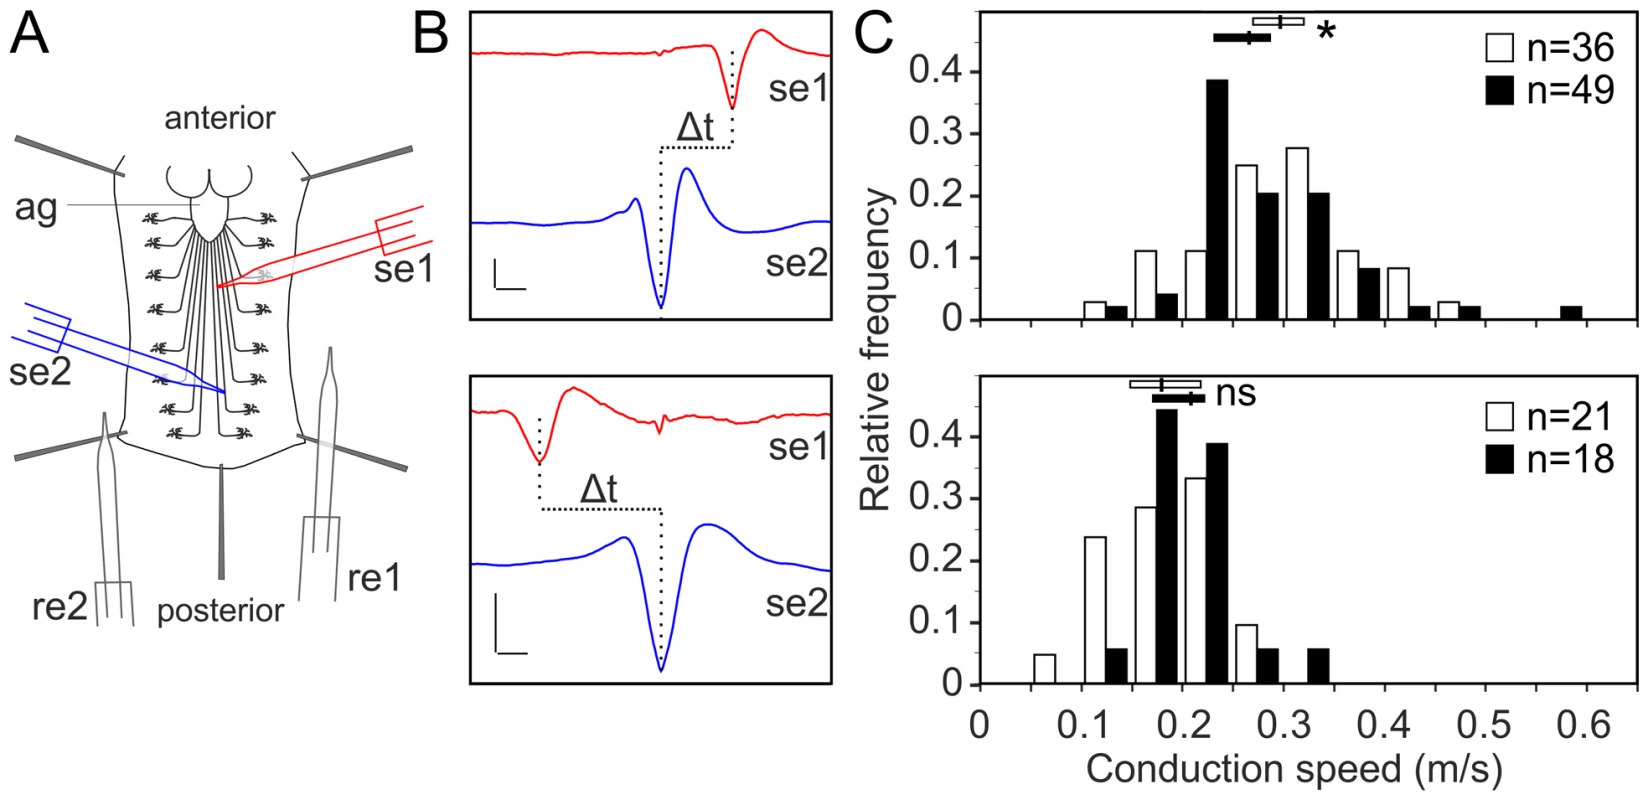 Glial inhibition of <i>lace</i> delays afferent spike propagation.